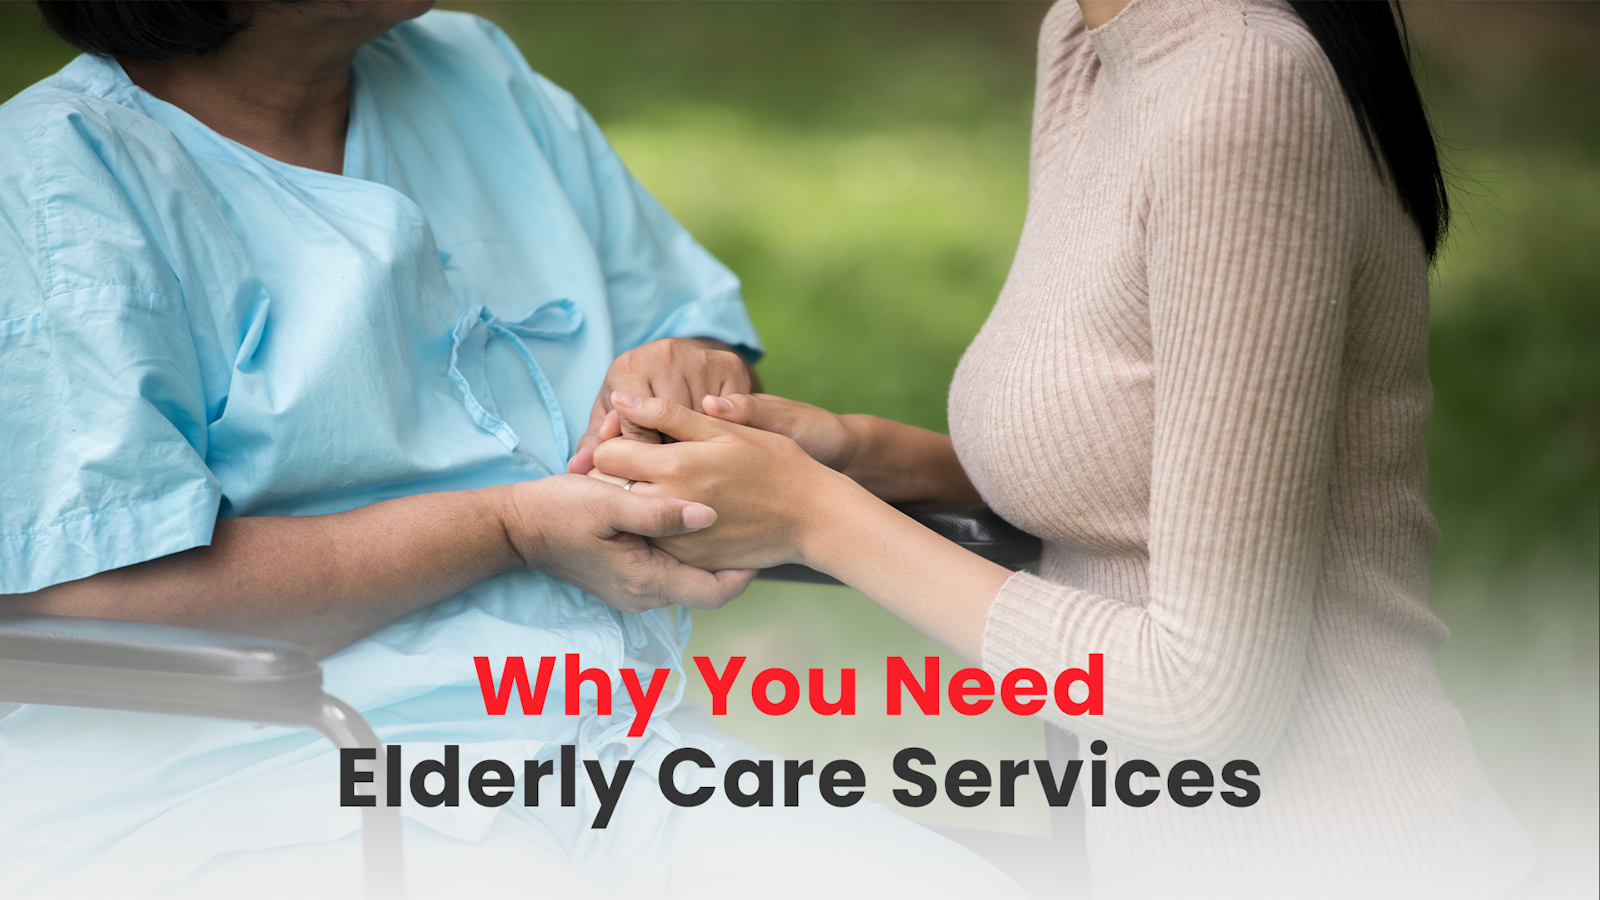 Why You Need Elderly Care Services